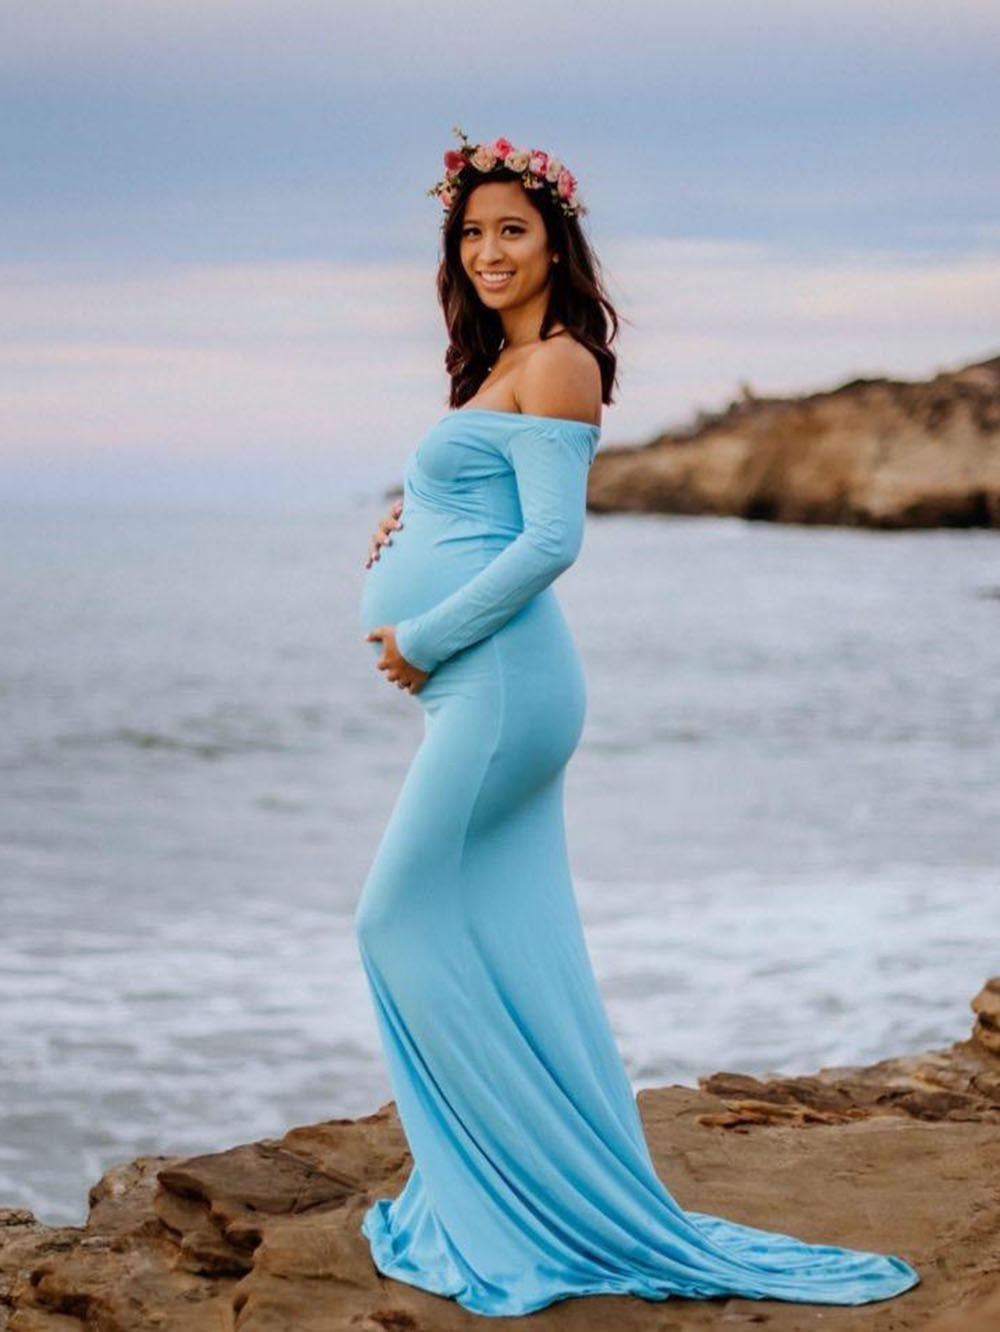 Long Sleeve Maxi Maternity Dress for Photography Props Elegant Pregnancy Clothes Pregnancy Dress Pregnant Photo Shoot Clothing